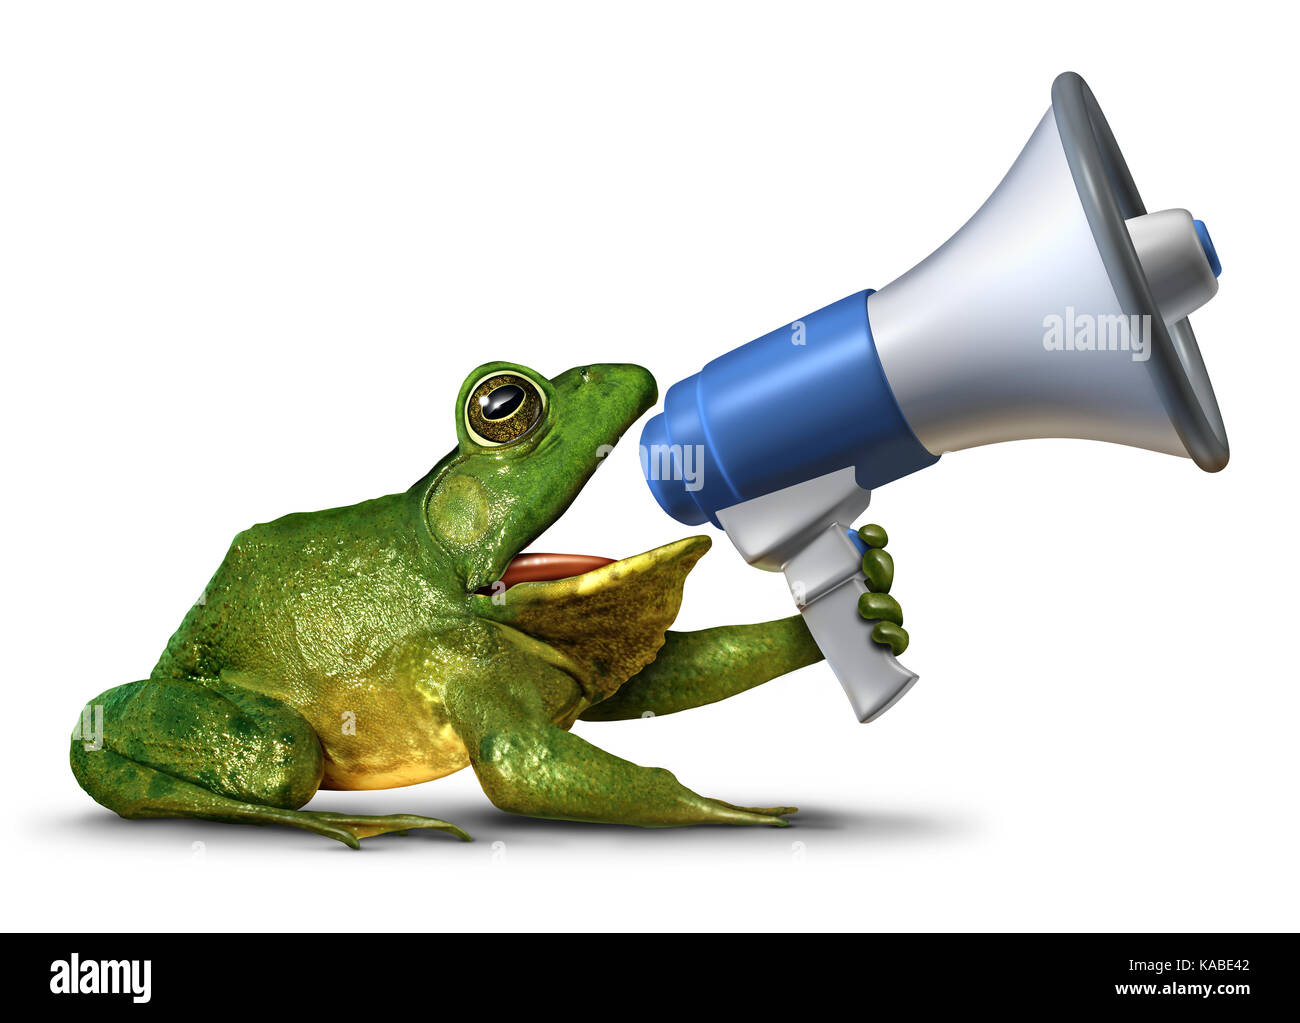 Frog announcer as a green amphibian holding a megaphone or bullhorn shouting a message as a promotion advertising and marketing. Stock Photo